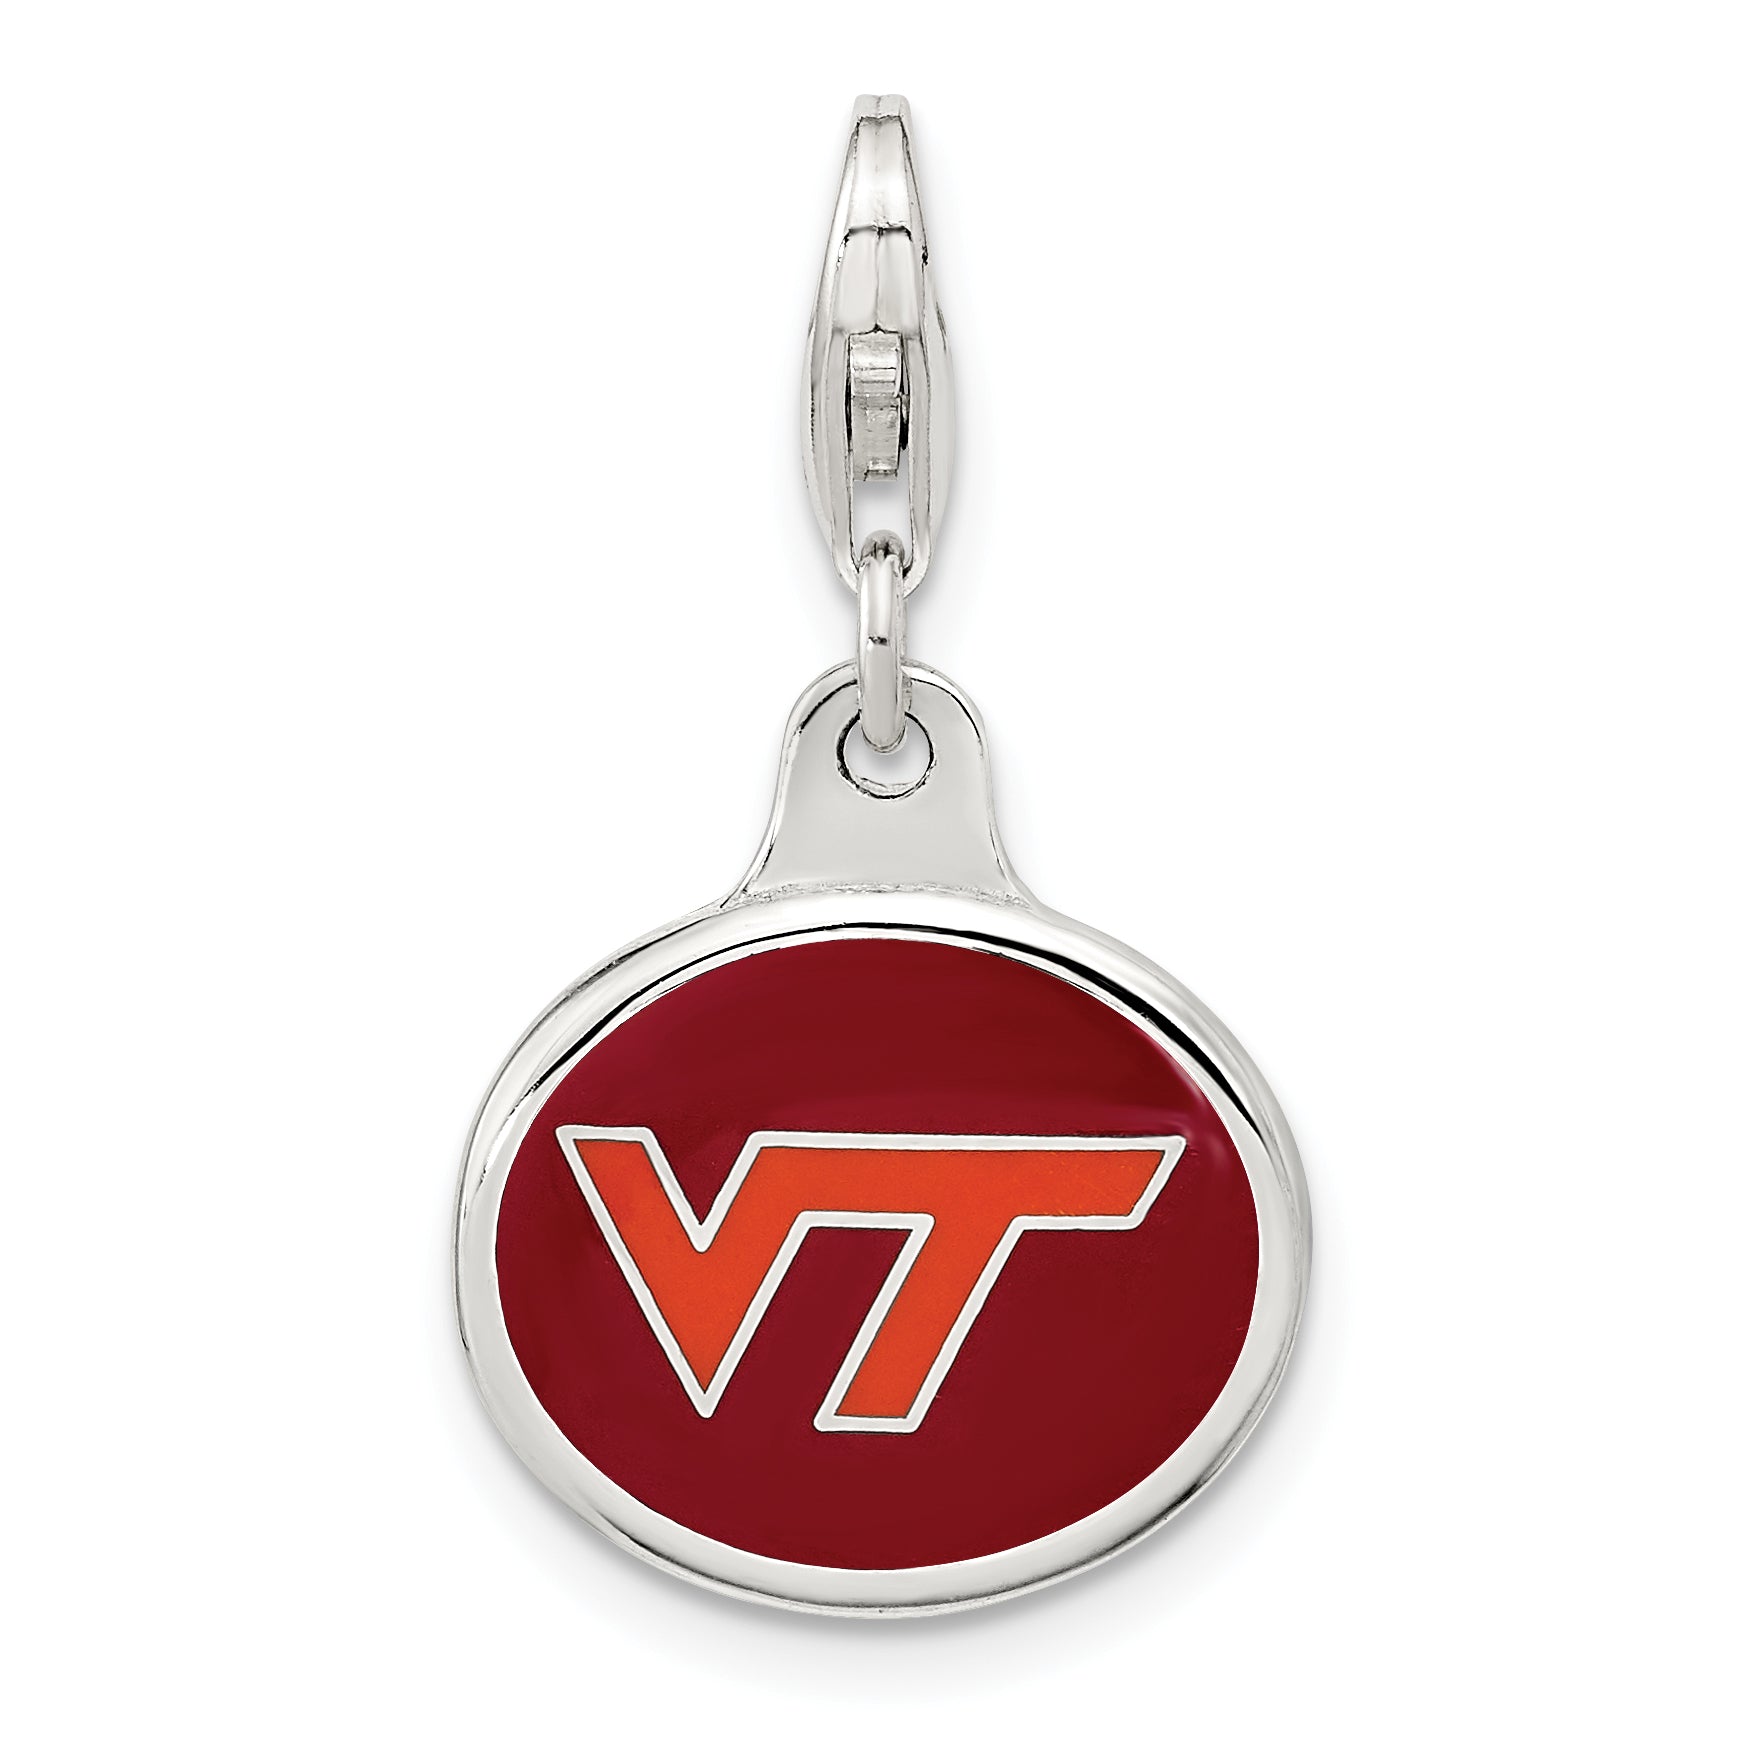 Amore La Vita Sterling Silver Rhodium-plated Polished Enameled Virginia Tech University Charm with Fancy Lobster Clasp